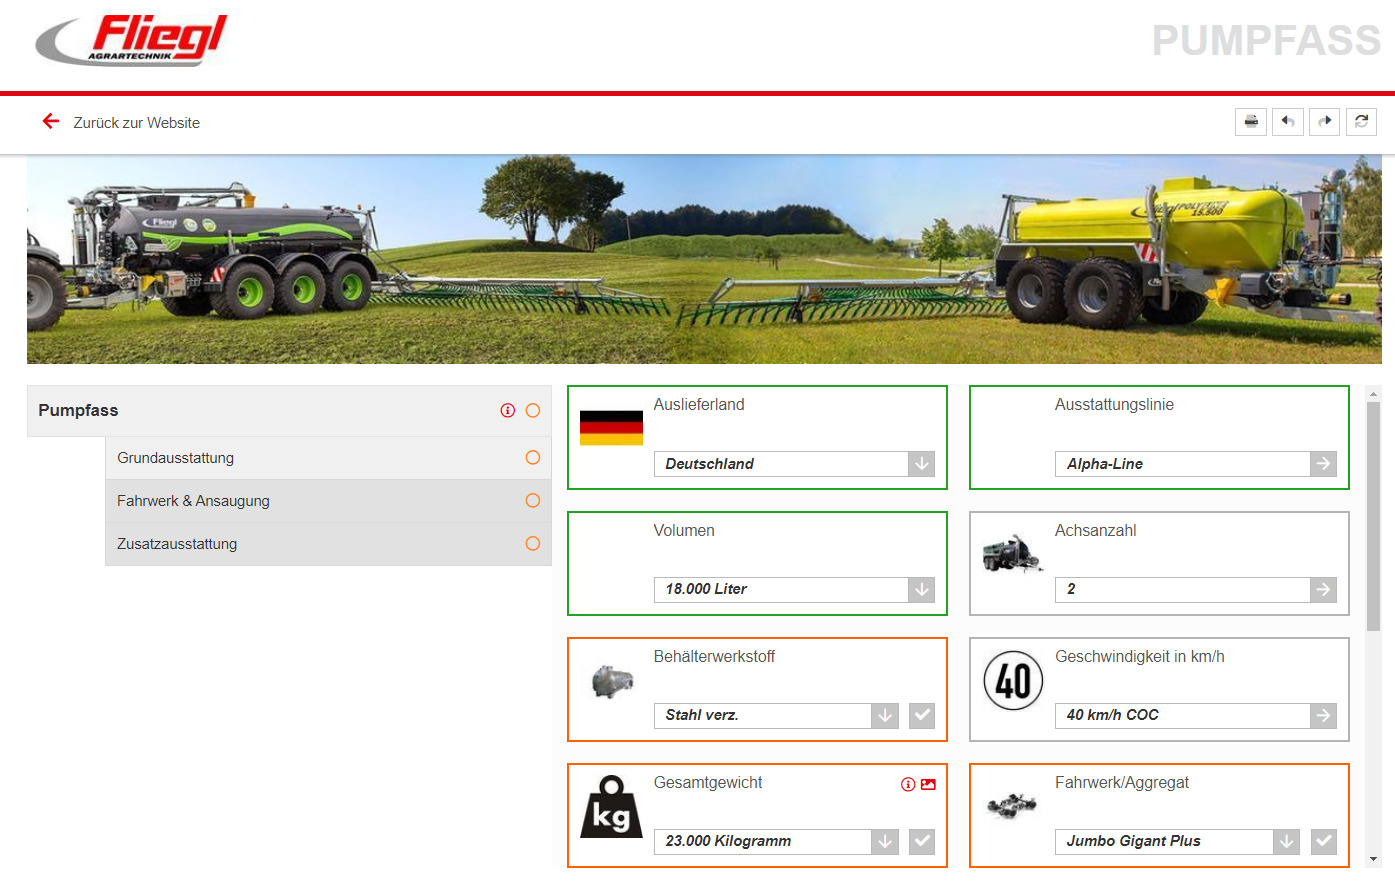  Configuring Fliegl’s agricultural trailers conveniently from home 